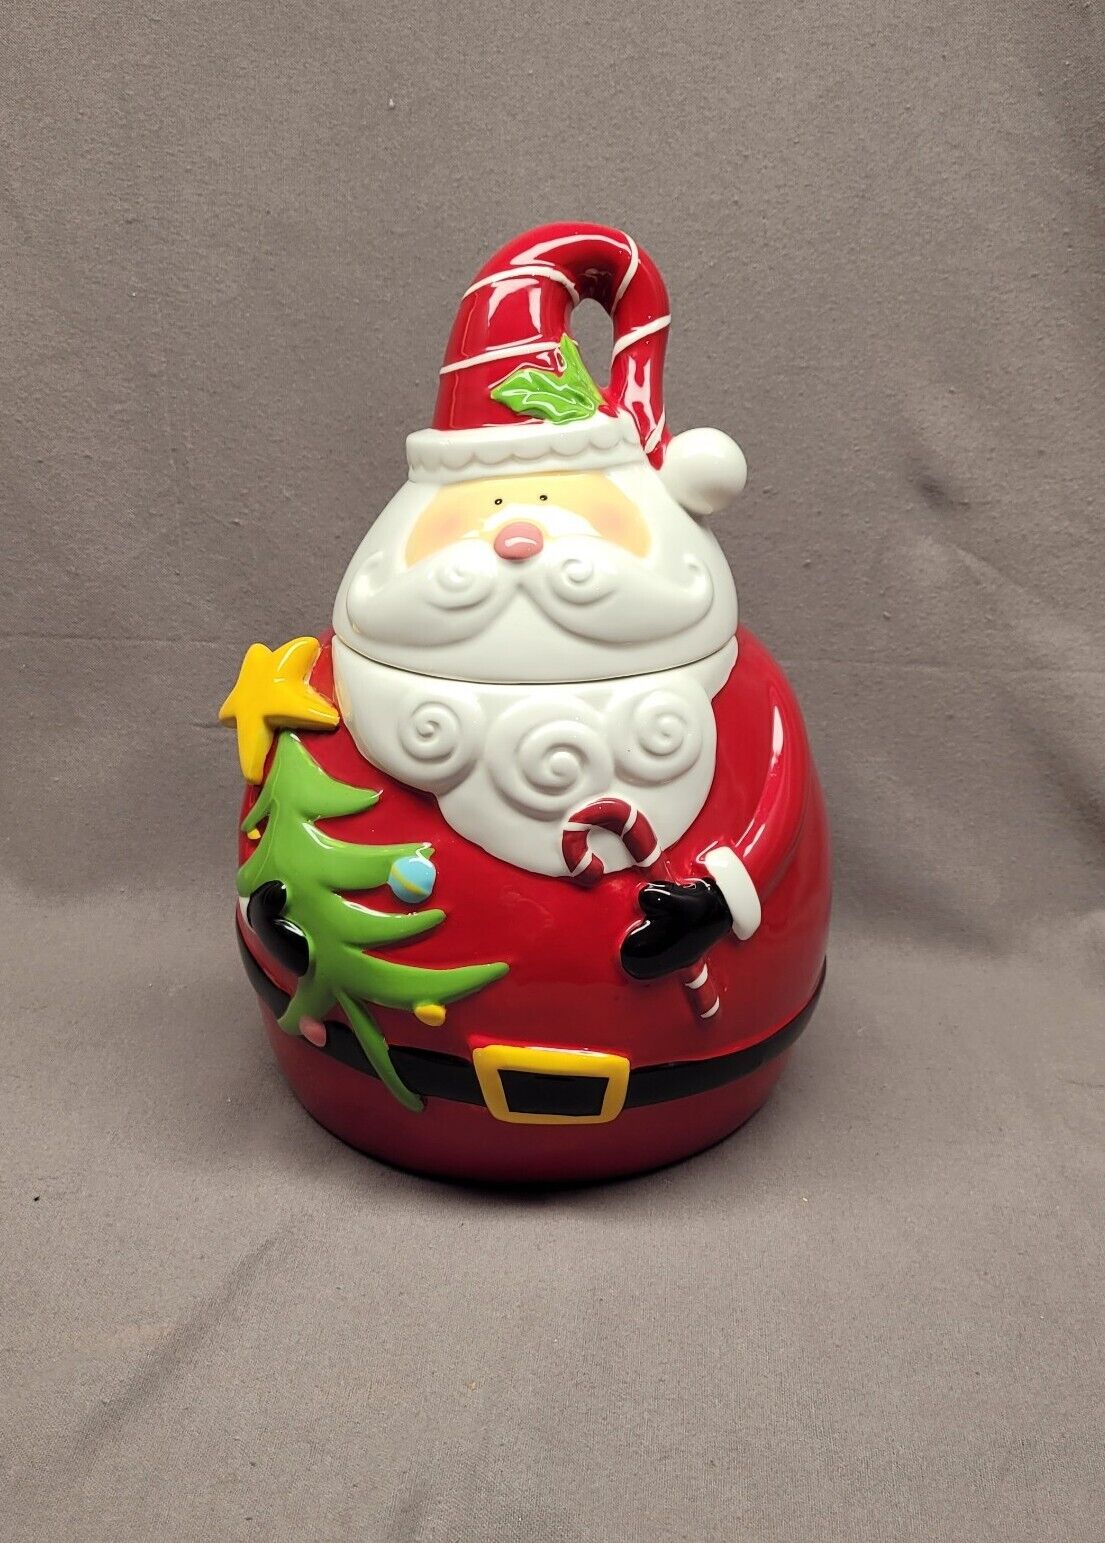 Ceramic Fat Santa Clause Cookie Jar Pier 1 Imports Hand Painted Rubber Seal 